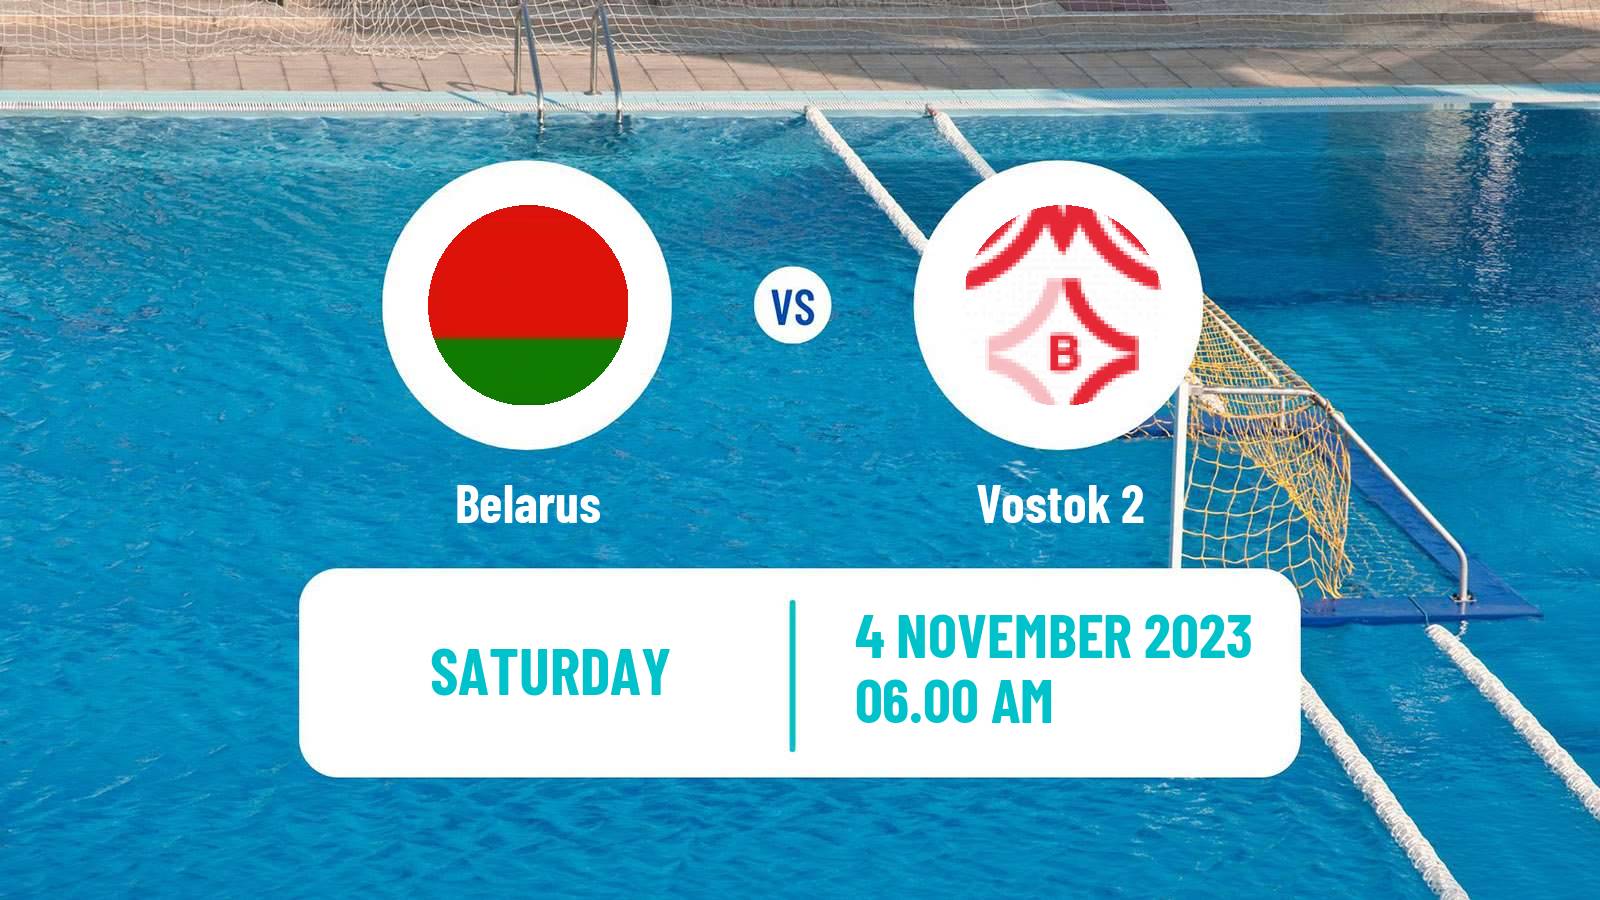 Water polo Russian Championship Water Polo Belarus - Vostok 2